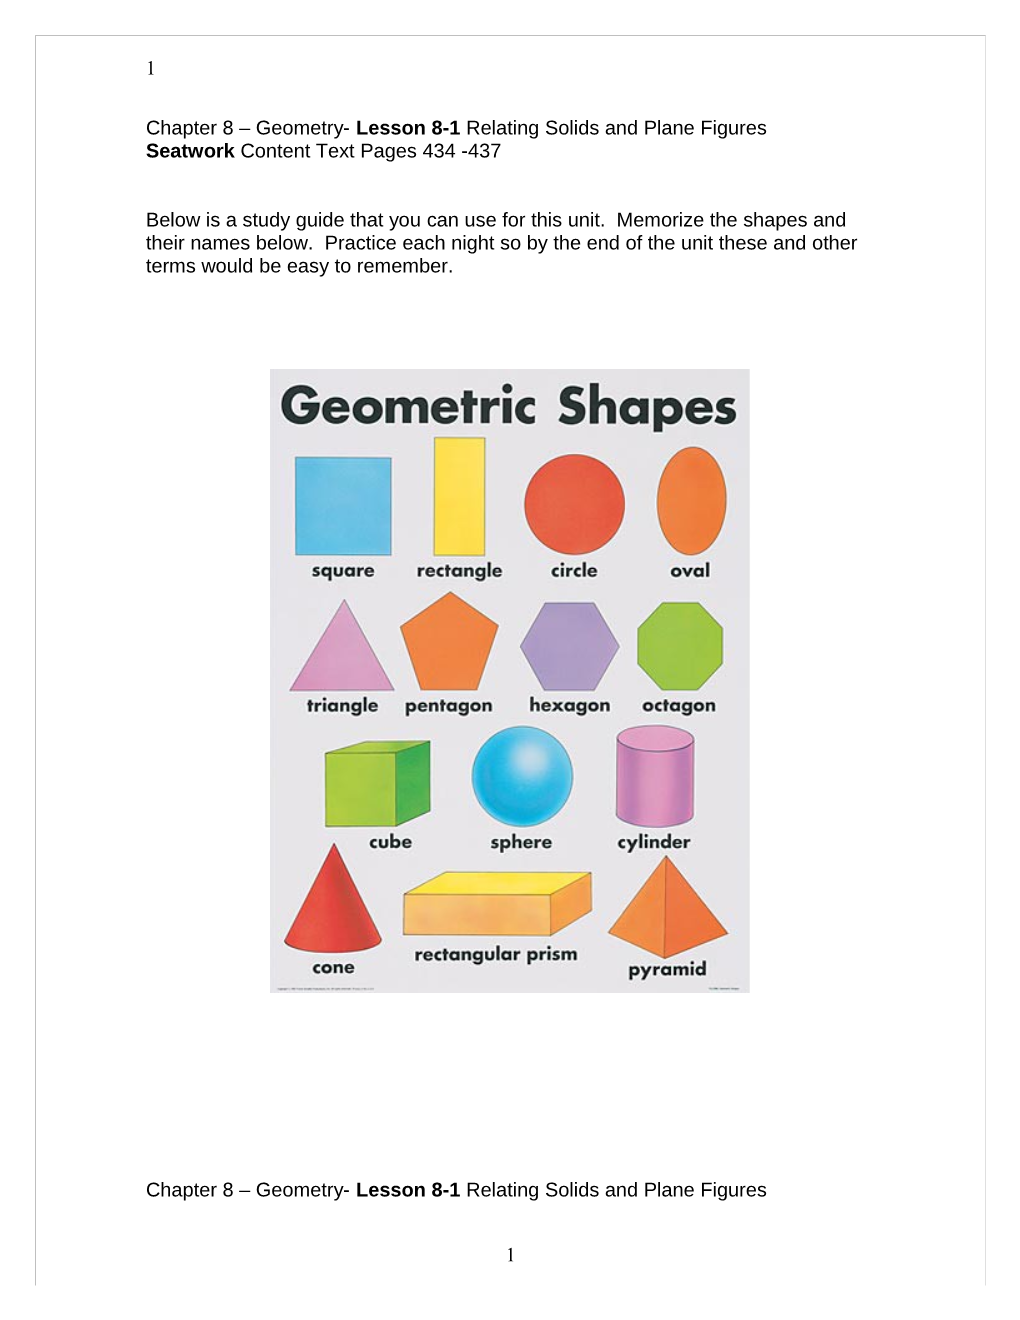 Chapter 8 Geometry- Lesson 8-1 Relating Solids and Plane Figures